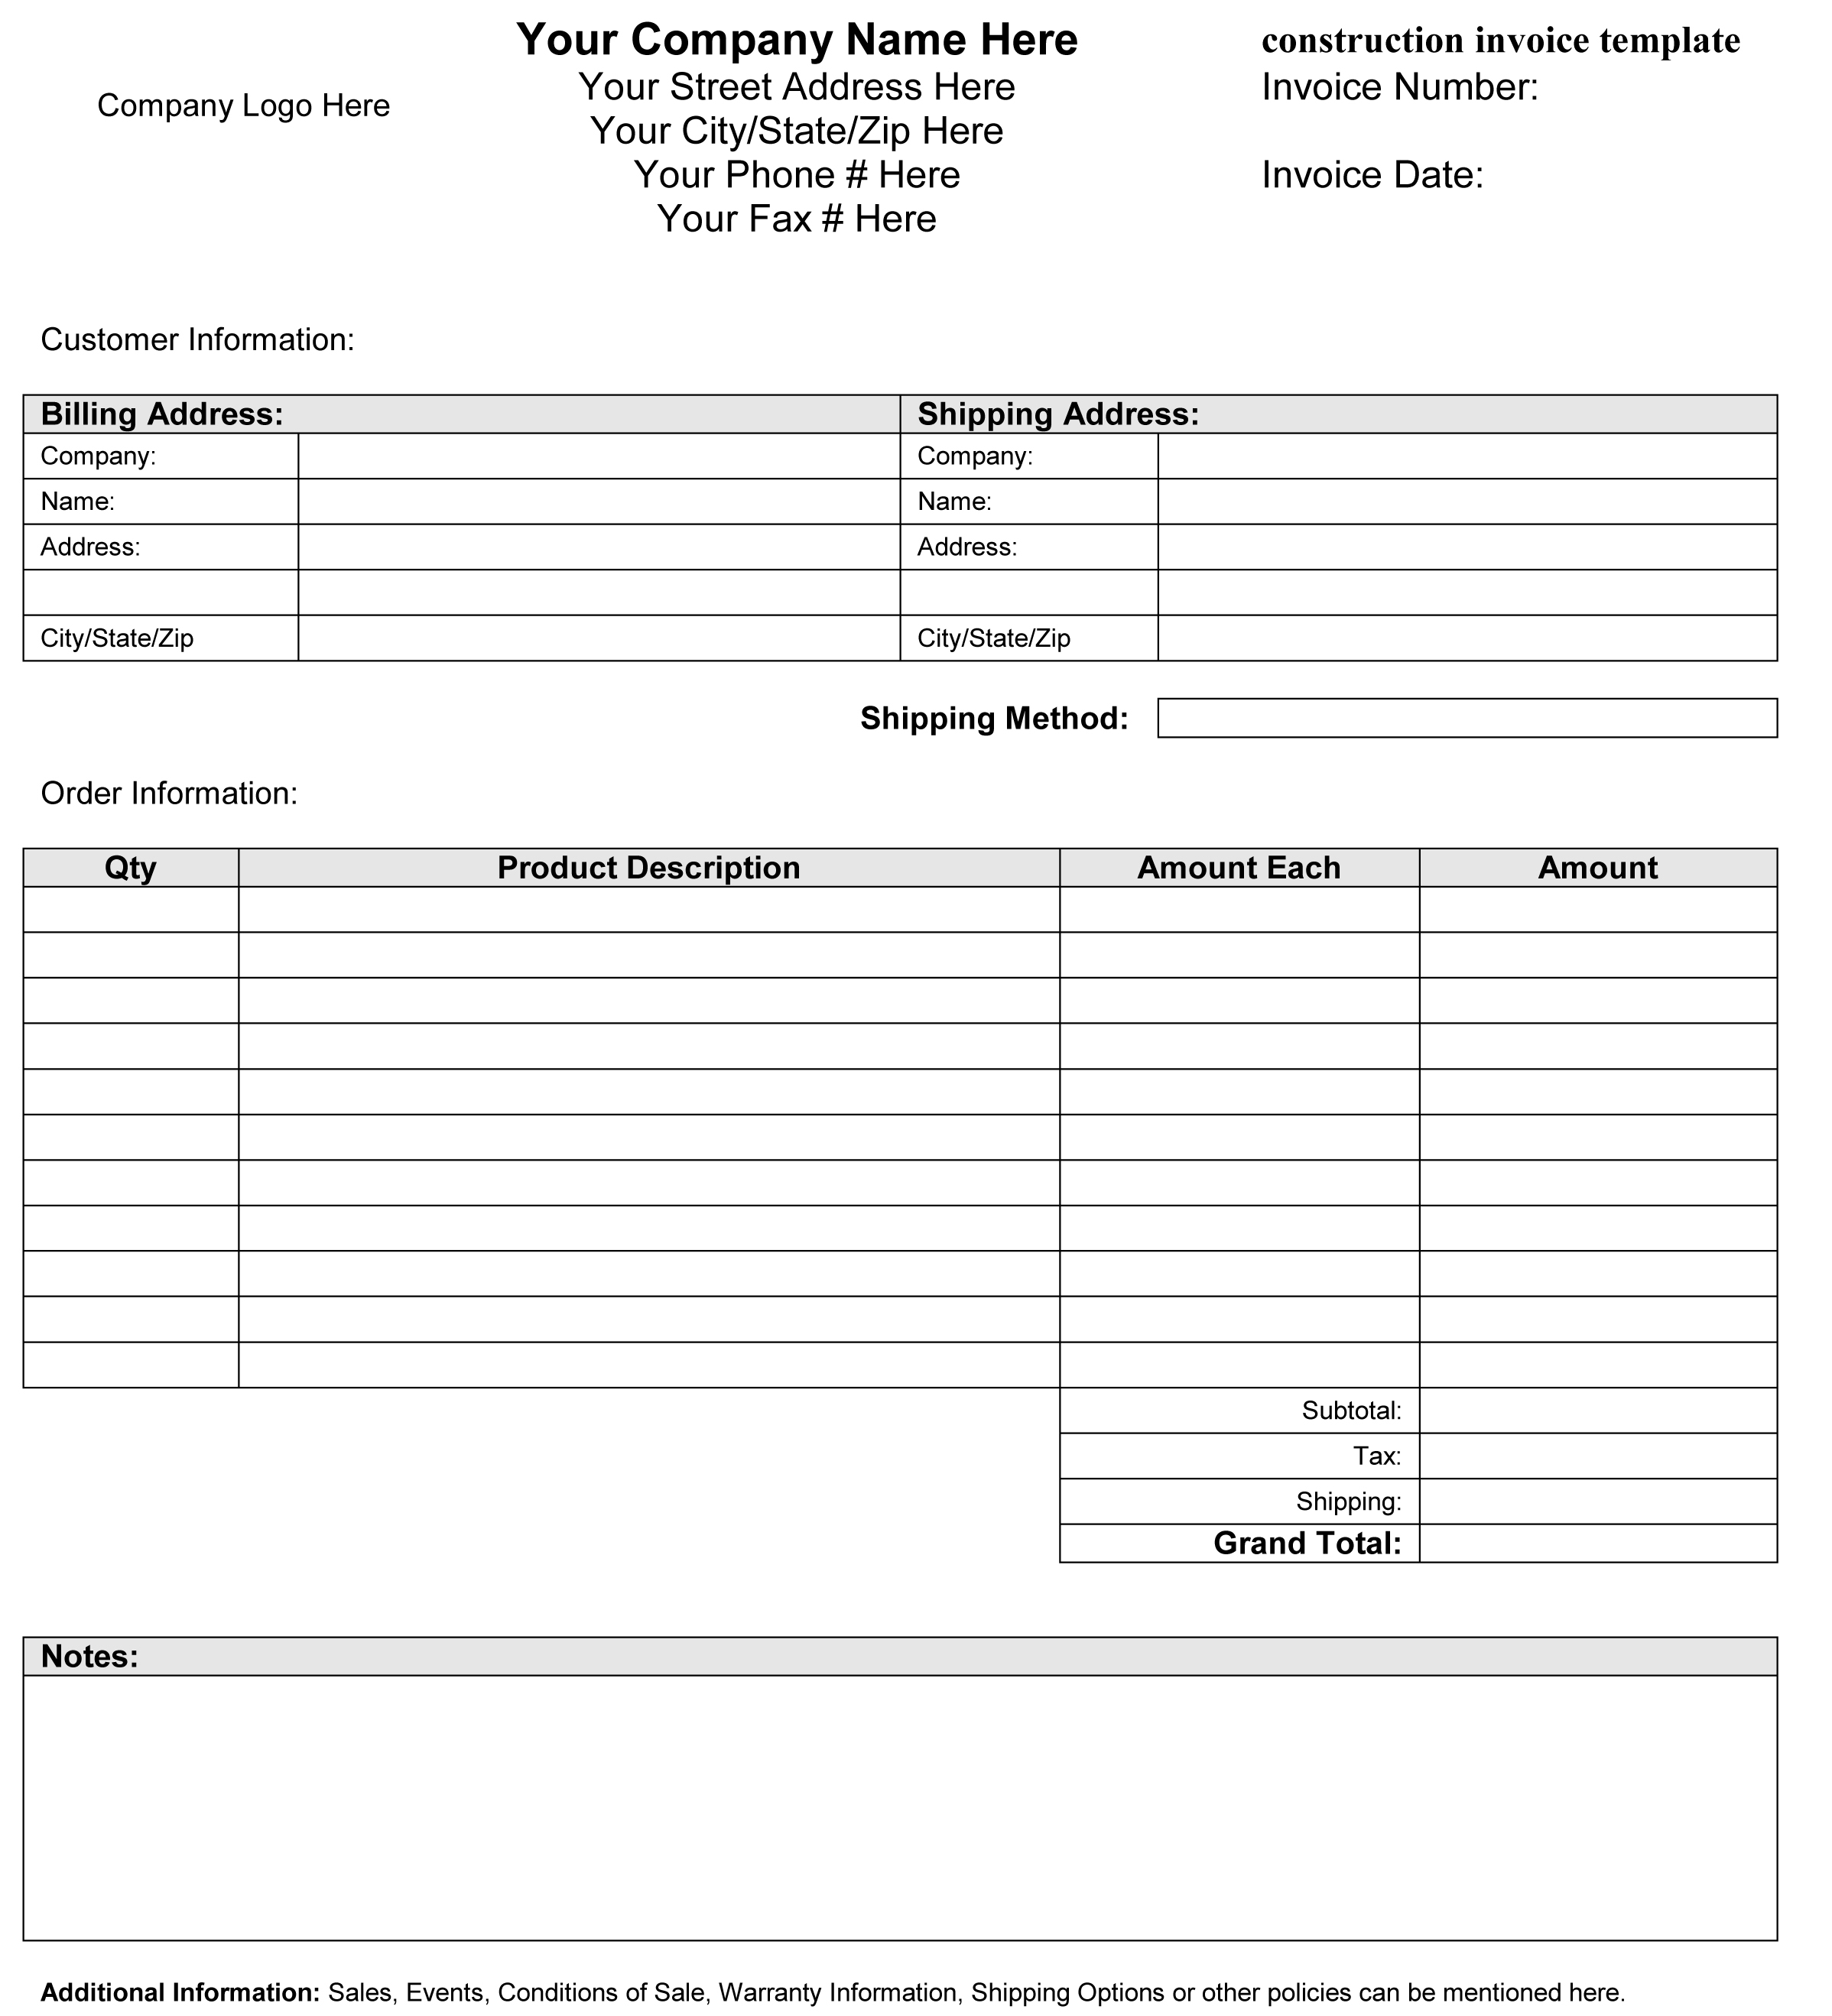 building a resume online for construction invoice template word building invoice template